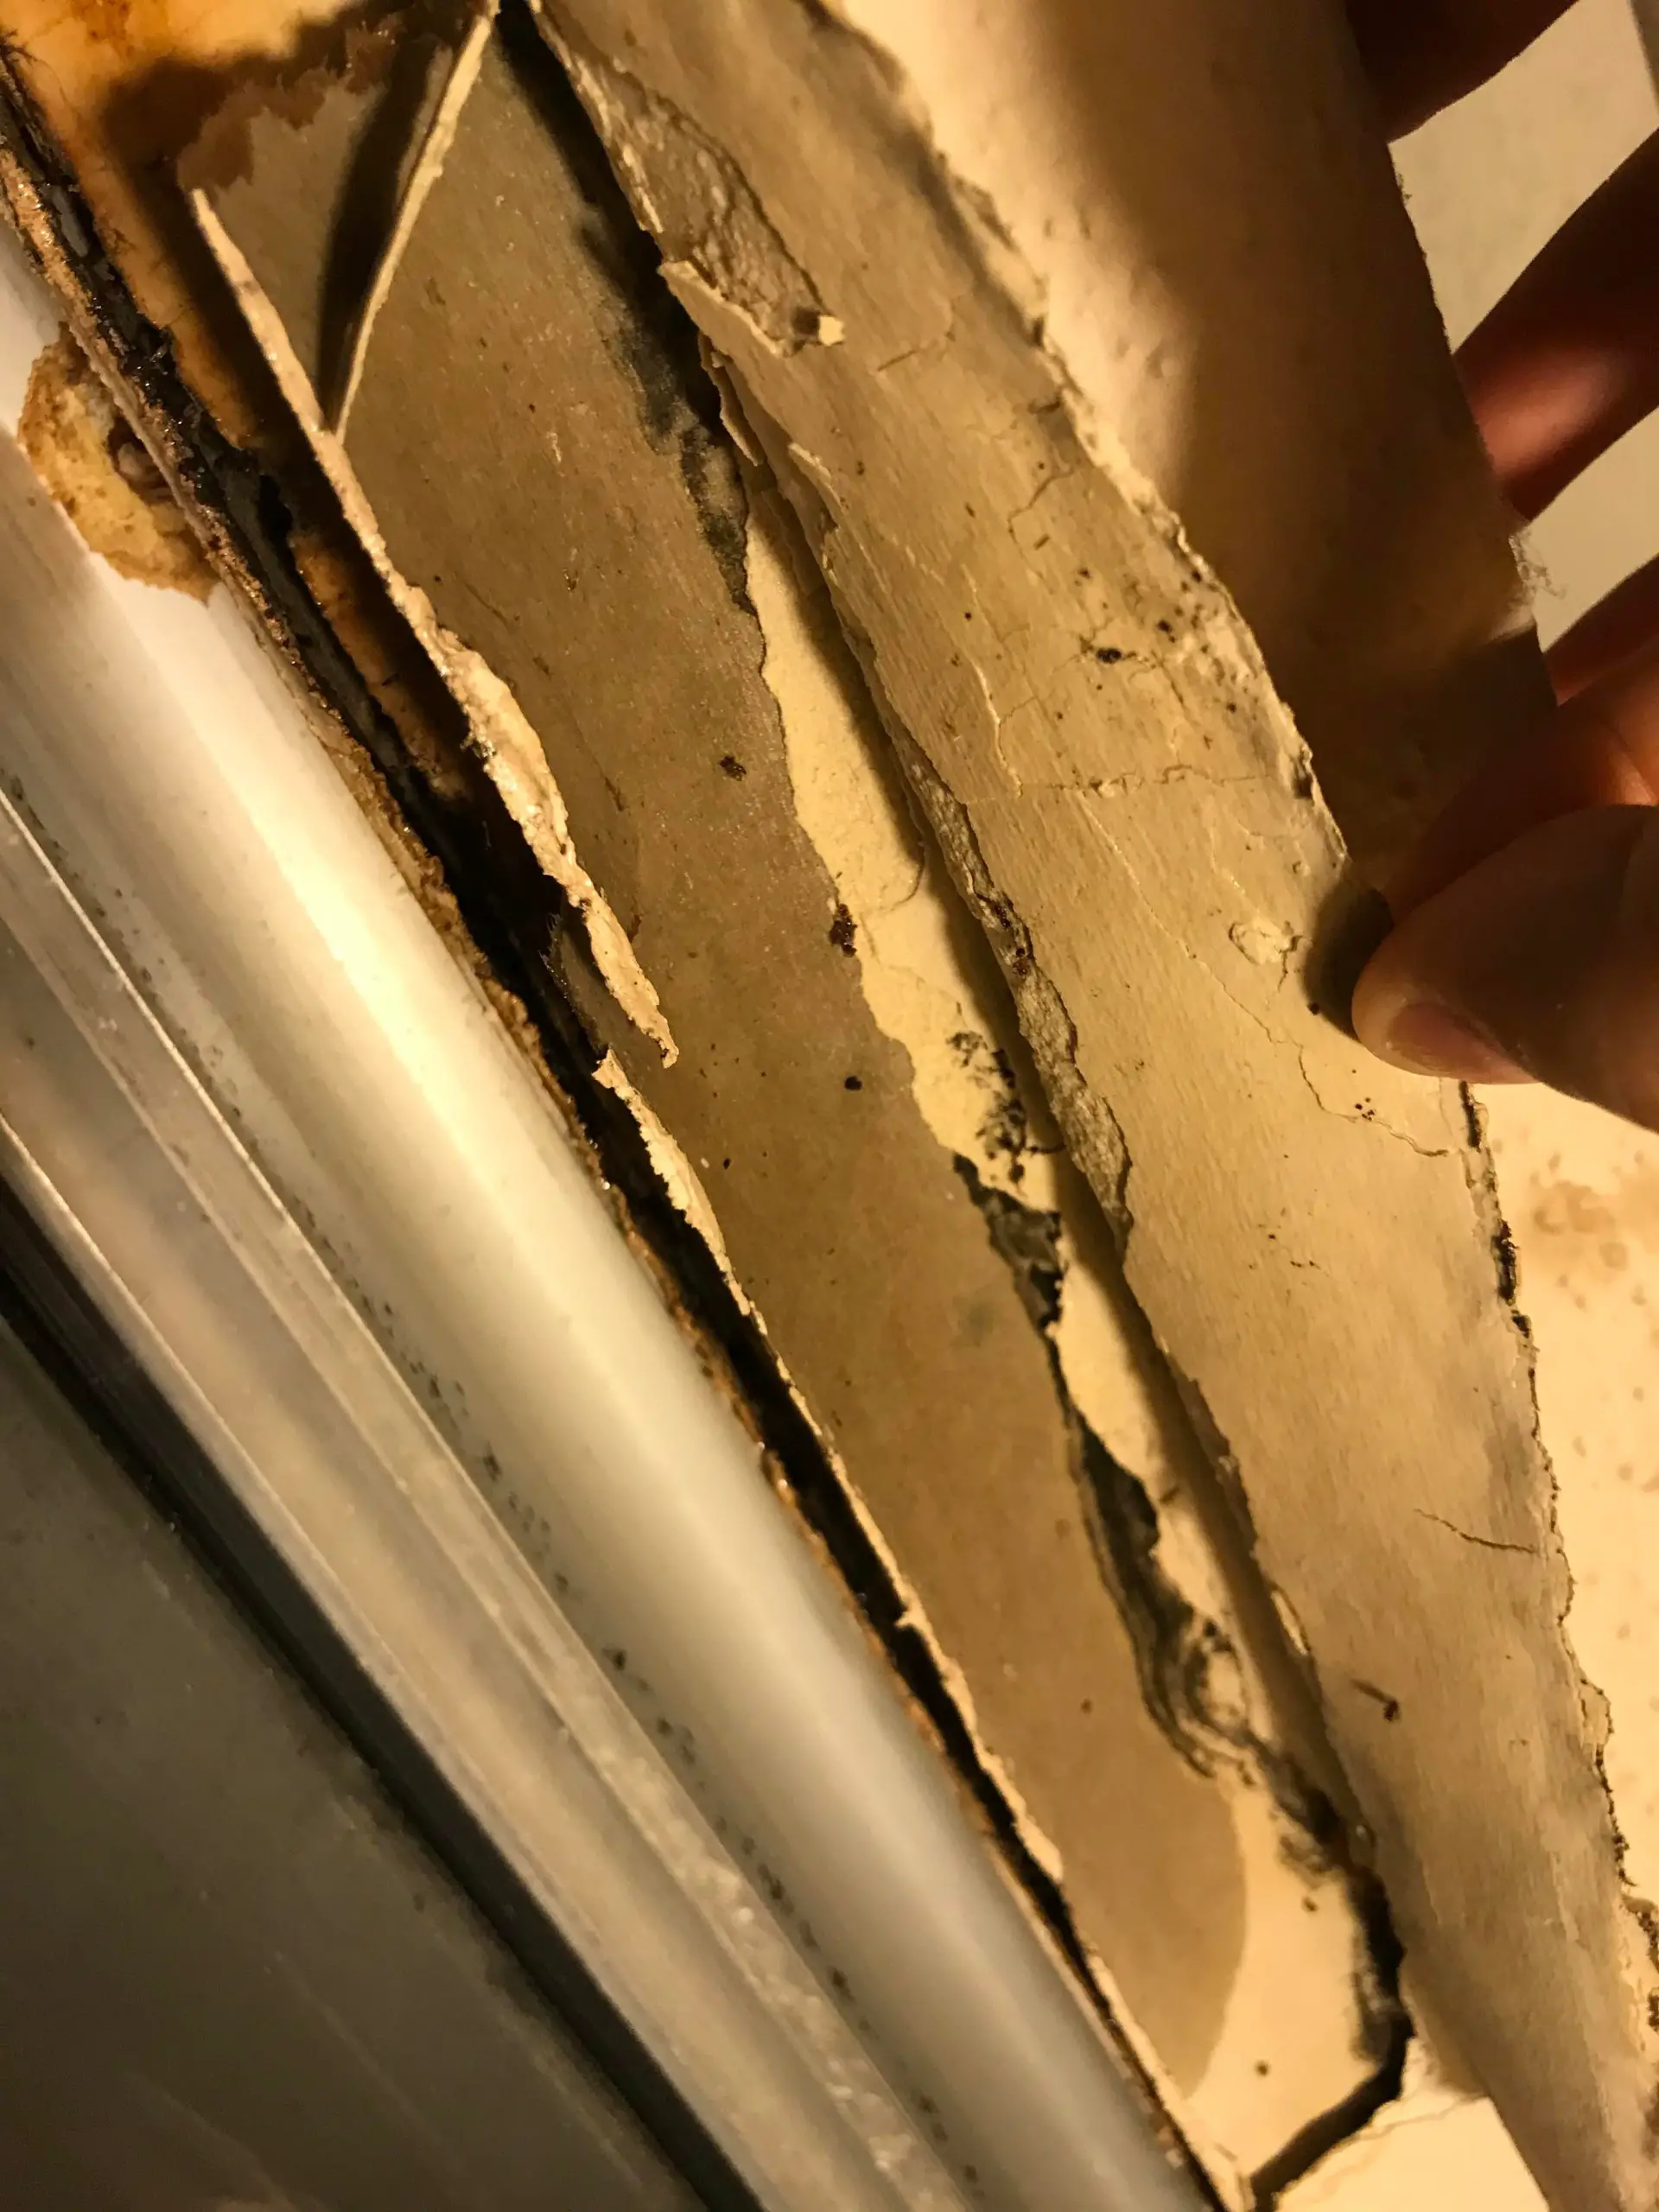 I think I found mold in my apartment! : Mold